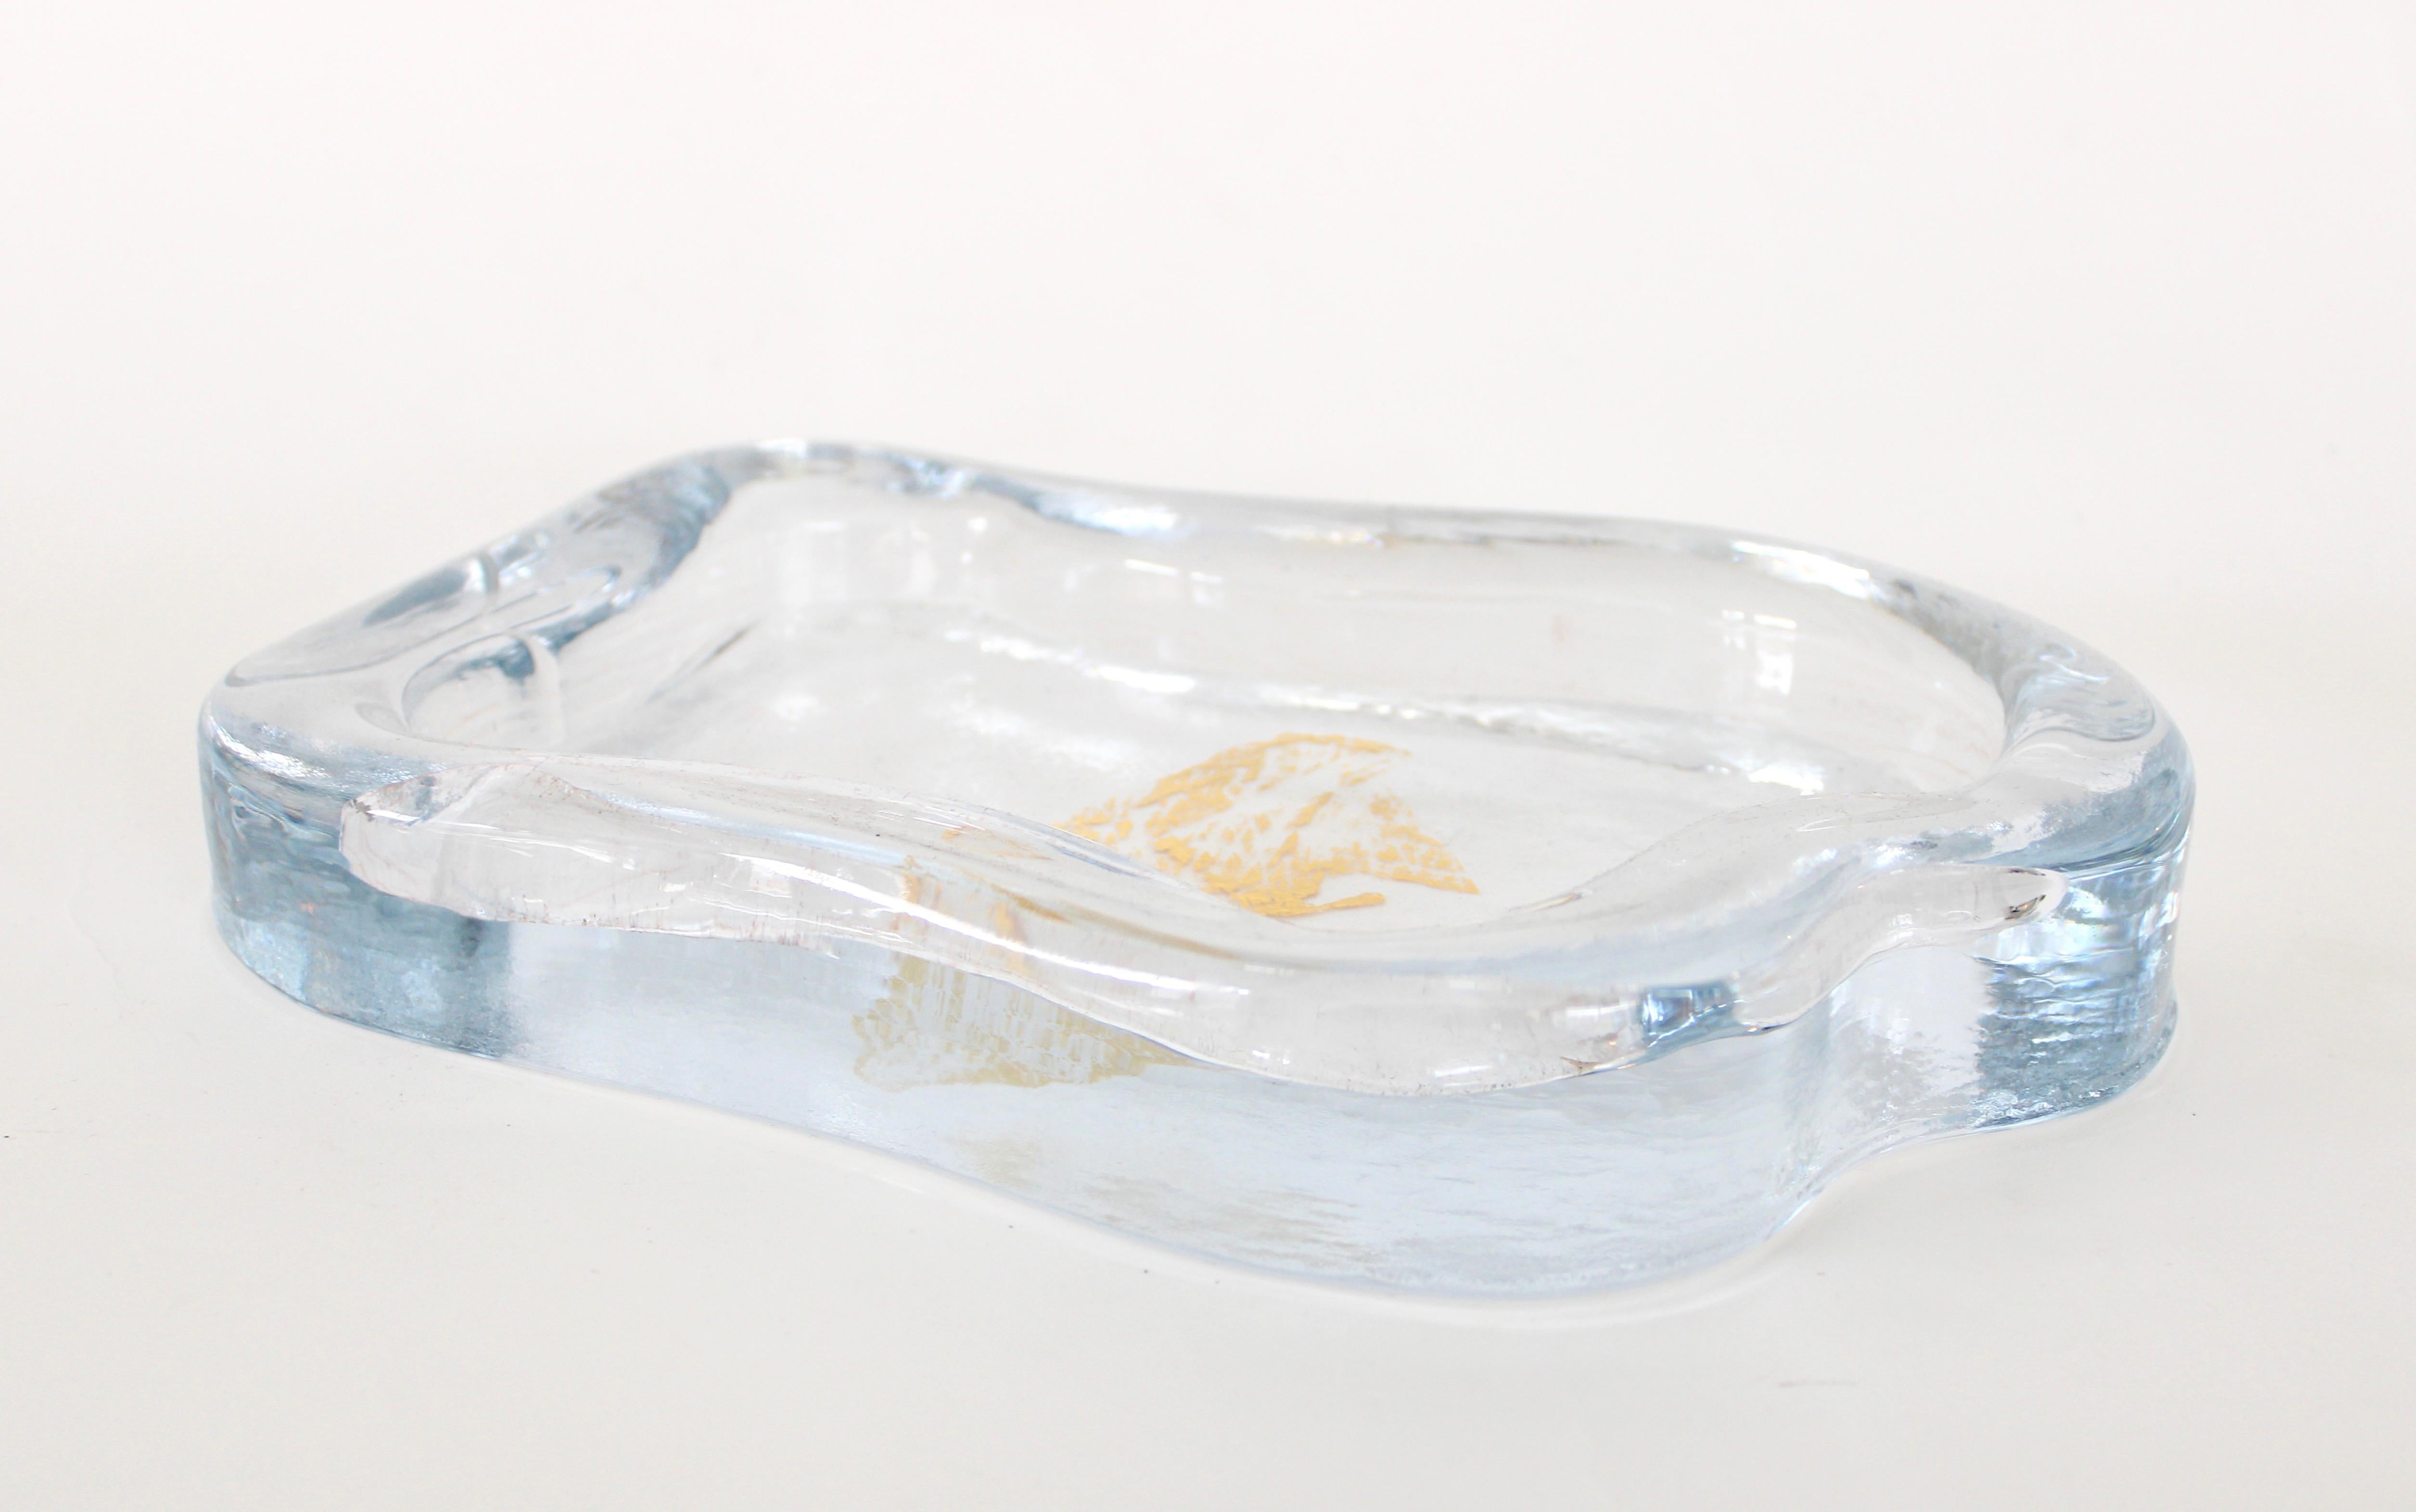 Moribana Venetian Murano glass dishes bowls or vide poches designed by Marie Rose Kahane for Yali Glass, 2019. Cast glass by Simone Cendesi. 
Each dish is inspired by the Venetian lagoons and in honour of water.
Venice is the home of Murano glass